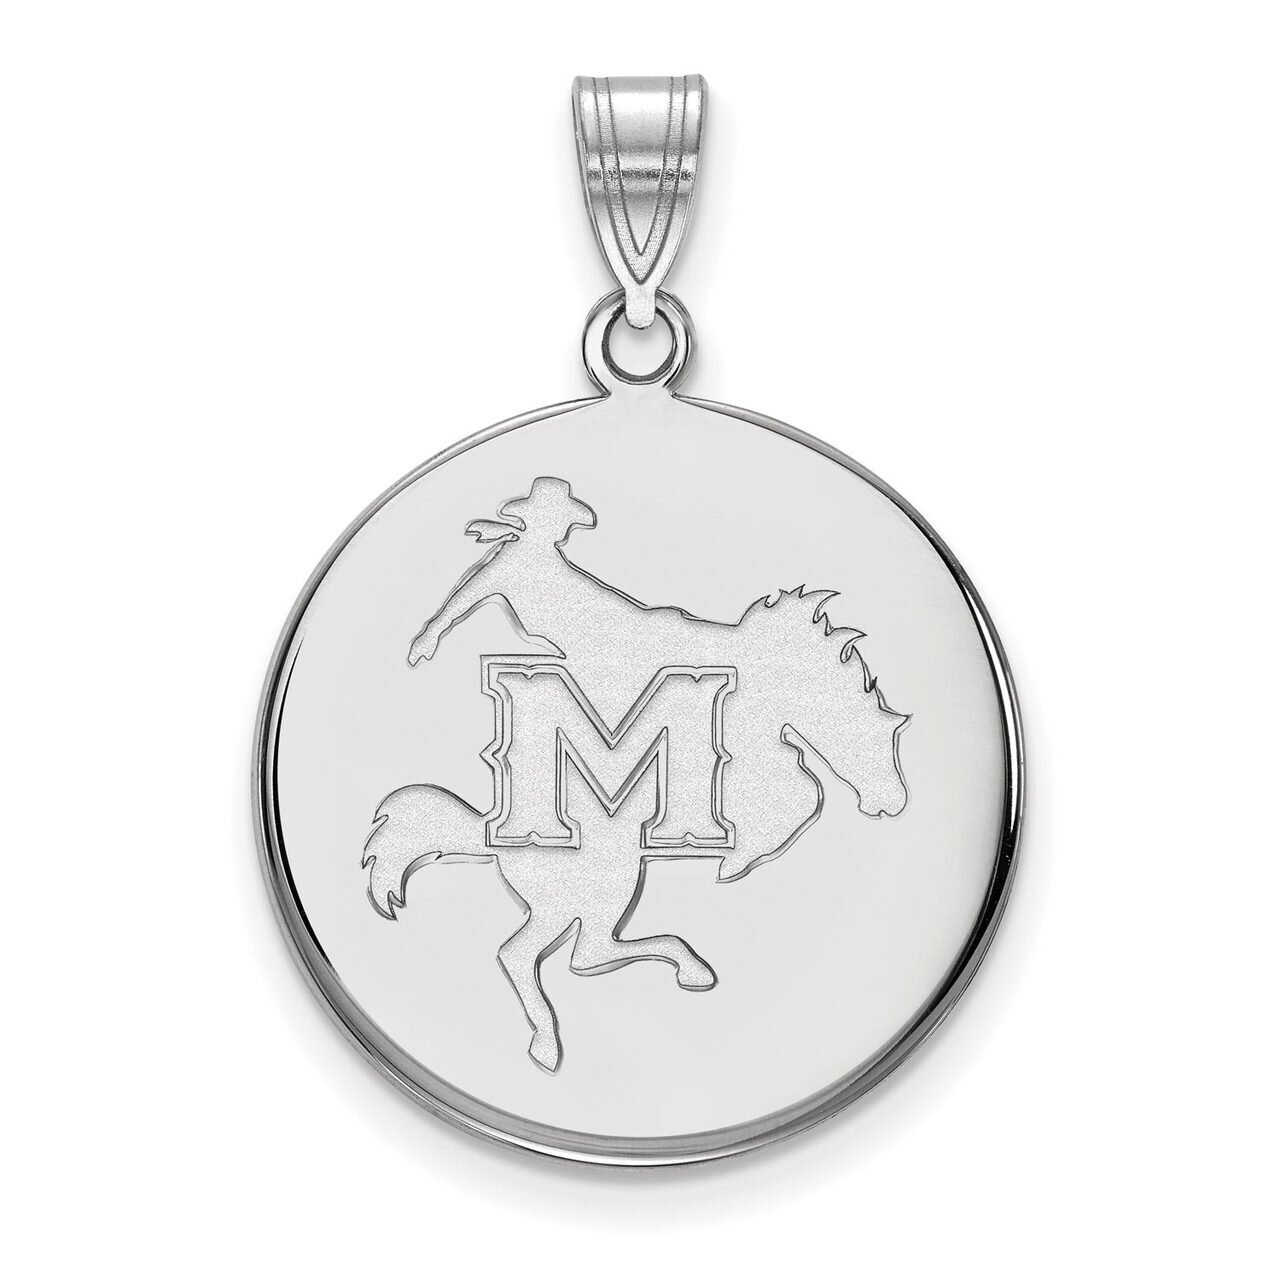 McNeese State University Large Disc Pendant Sterling Silver SS001MNS